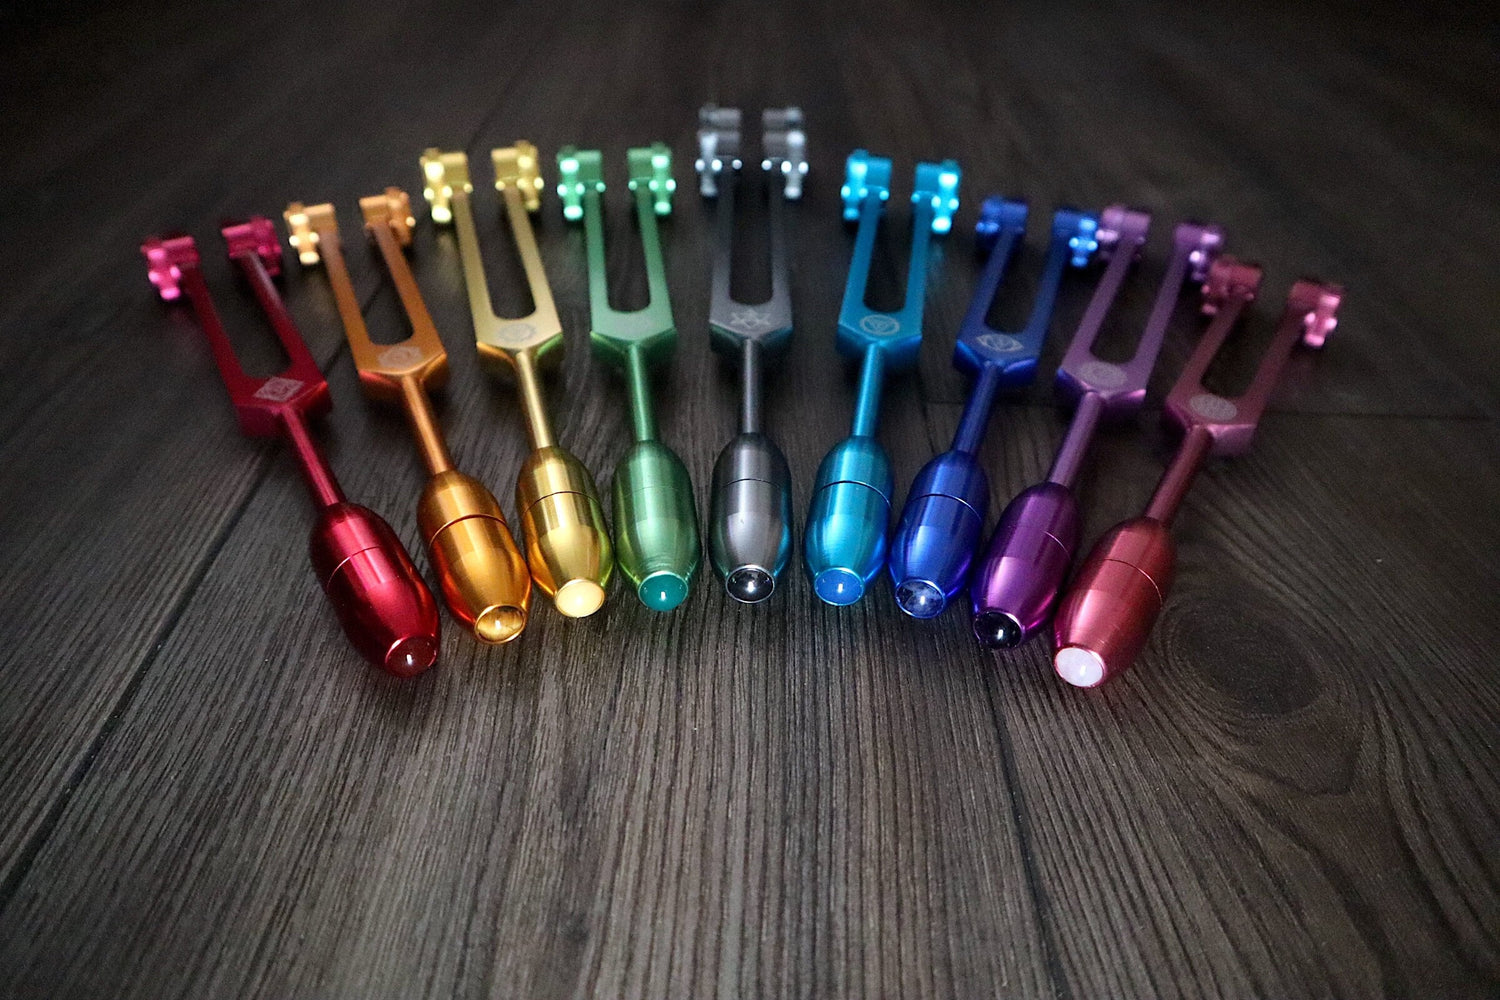 Myriad Melodies' Professionally Tuned .25 9pc Chakra Tuning Forks with 10pc Crystal Massage Attenuator Set - Biofield, Sound Vibration